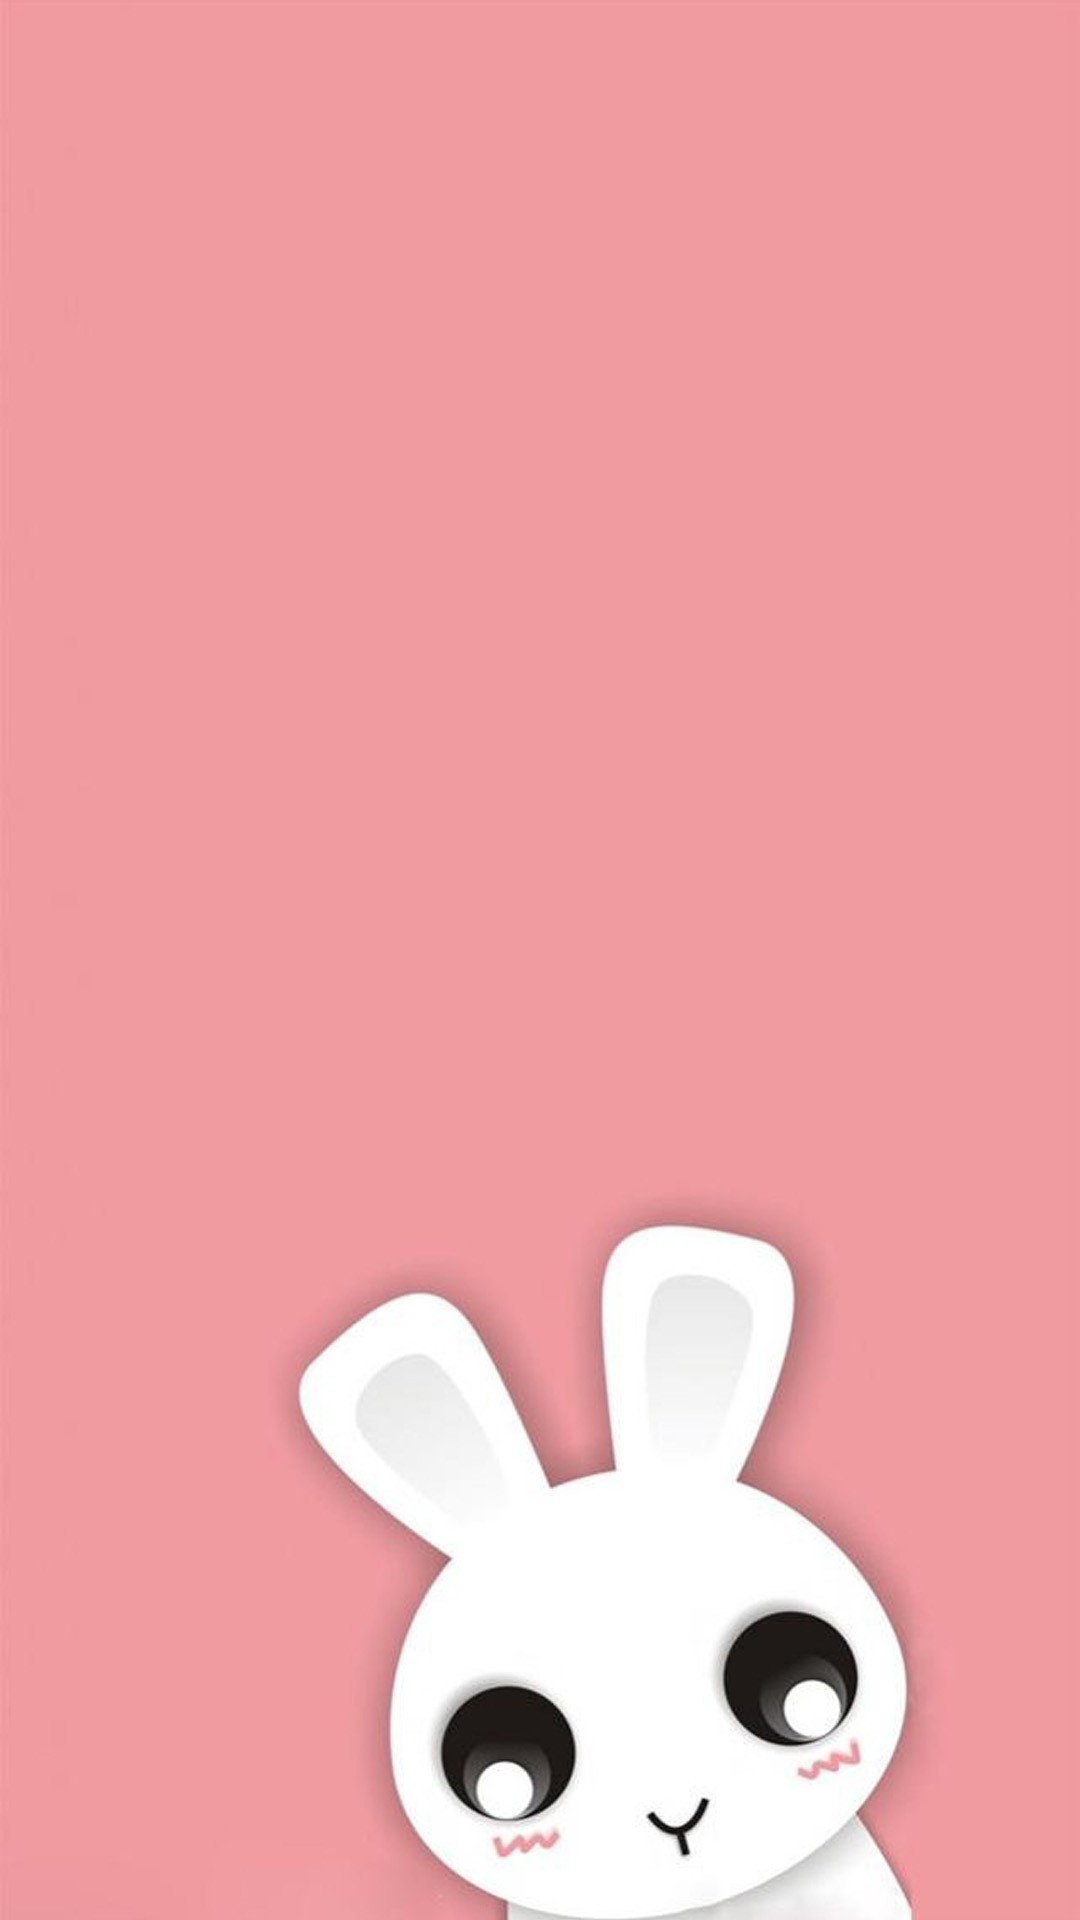 Cute Phone 8 Wallpaper with high-resolution 1080x1920 pixel. Download all Mobile Wallpapers and Use them as wallpapers for your iPhone, Tablet, iPad, Android and other mobile devices